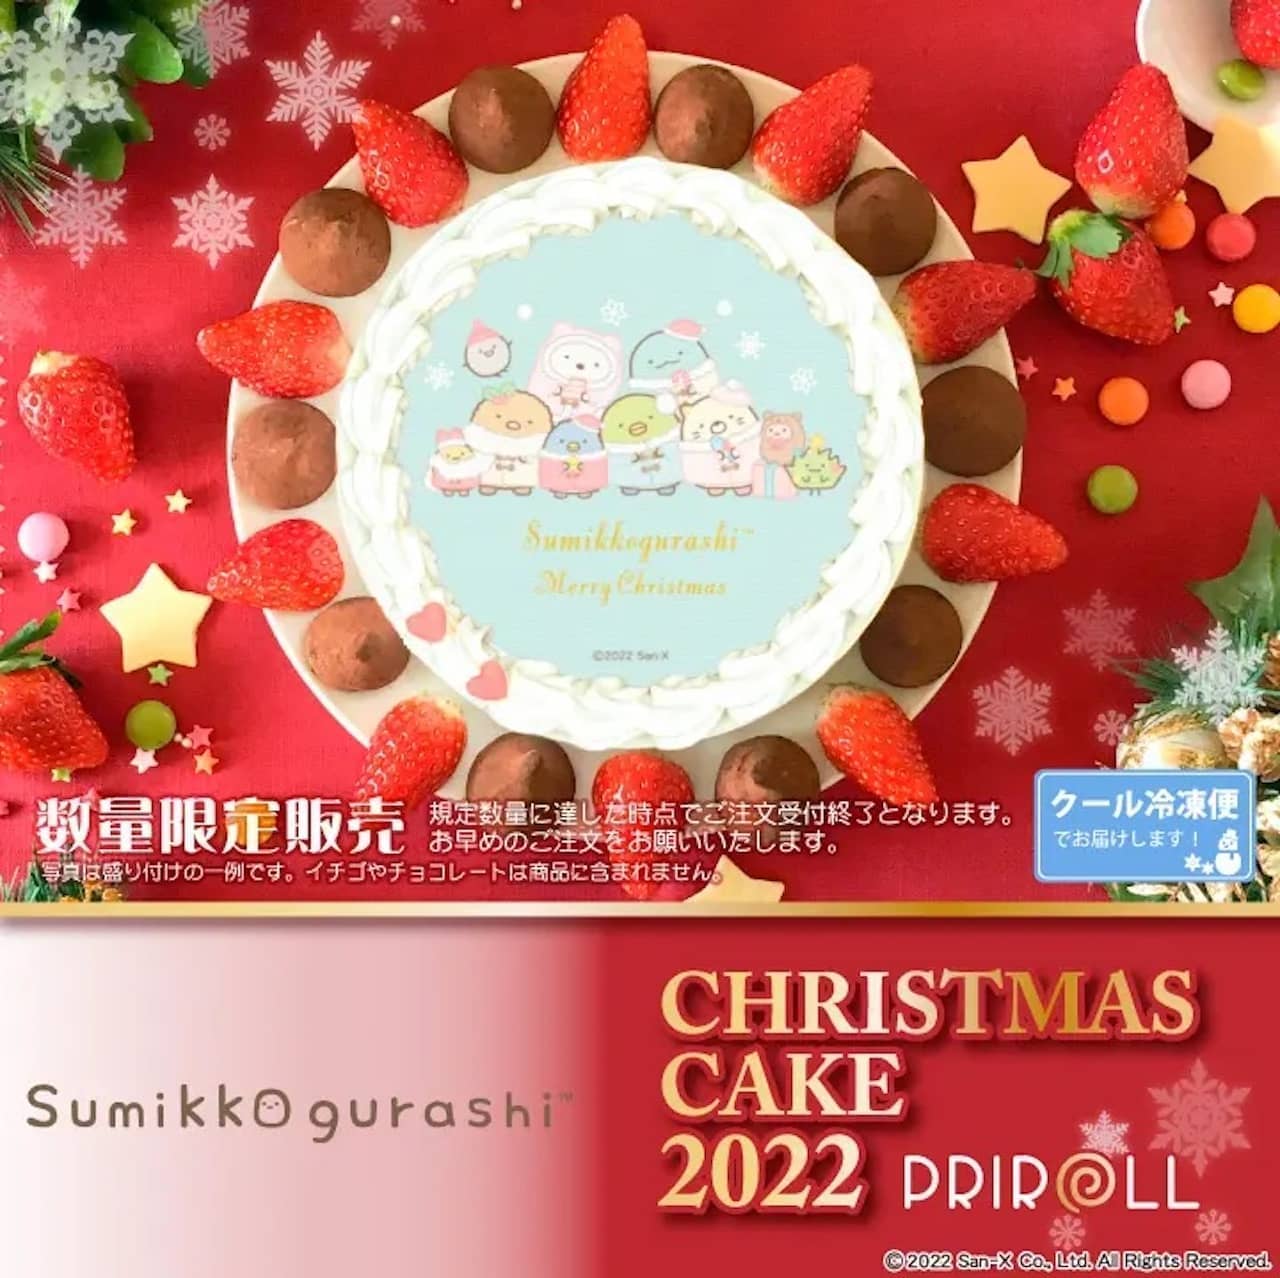 Sumikko Gurashi Christmas Limited Design Printed Cake" from Pre-Roll